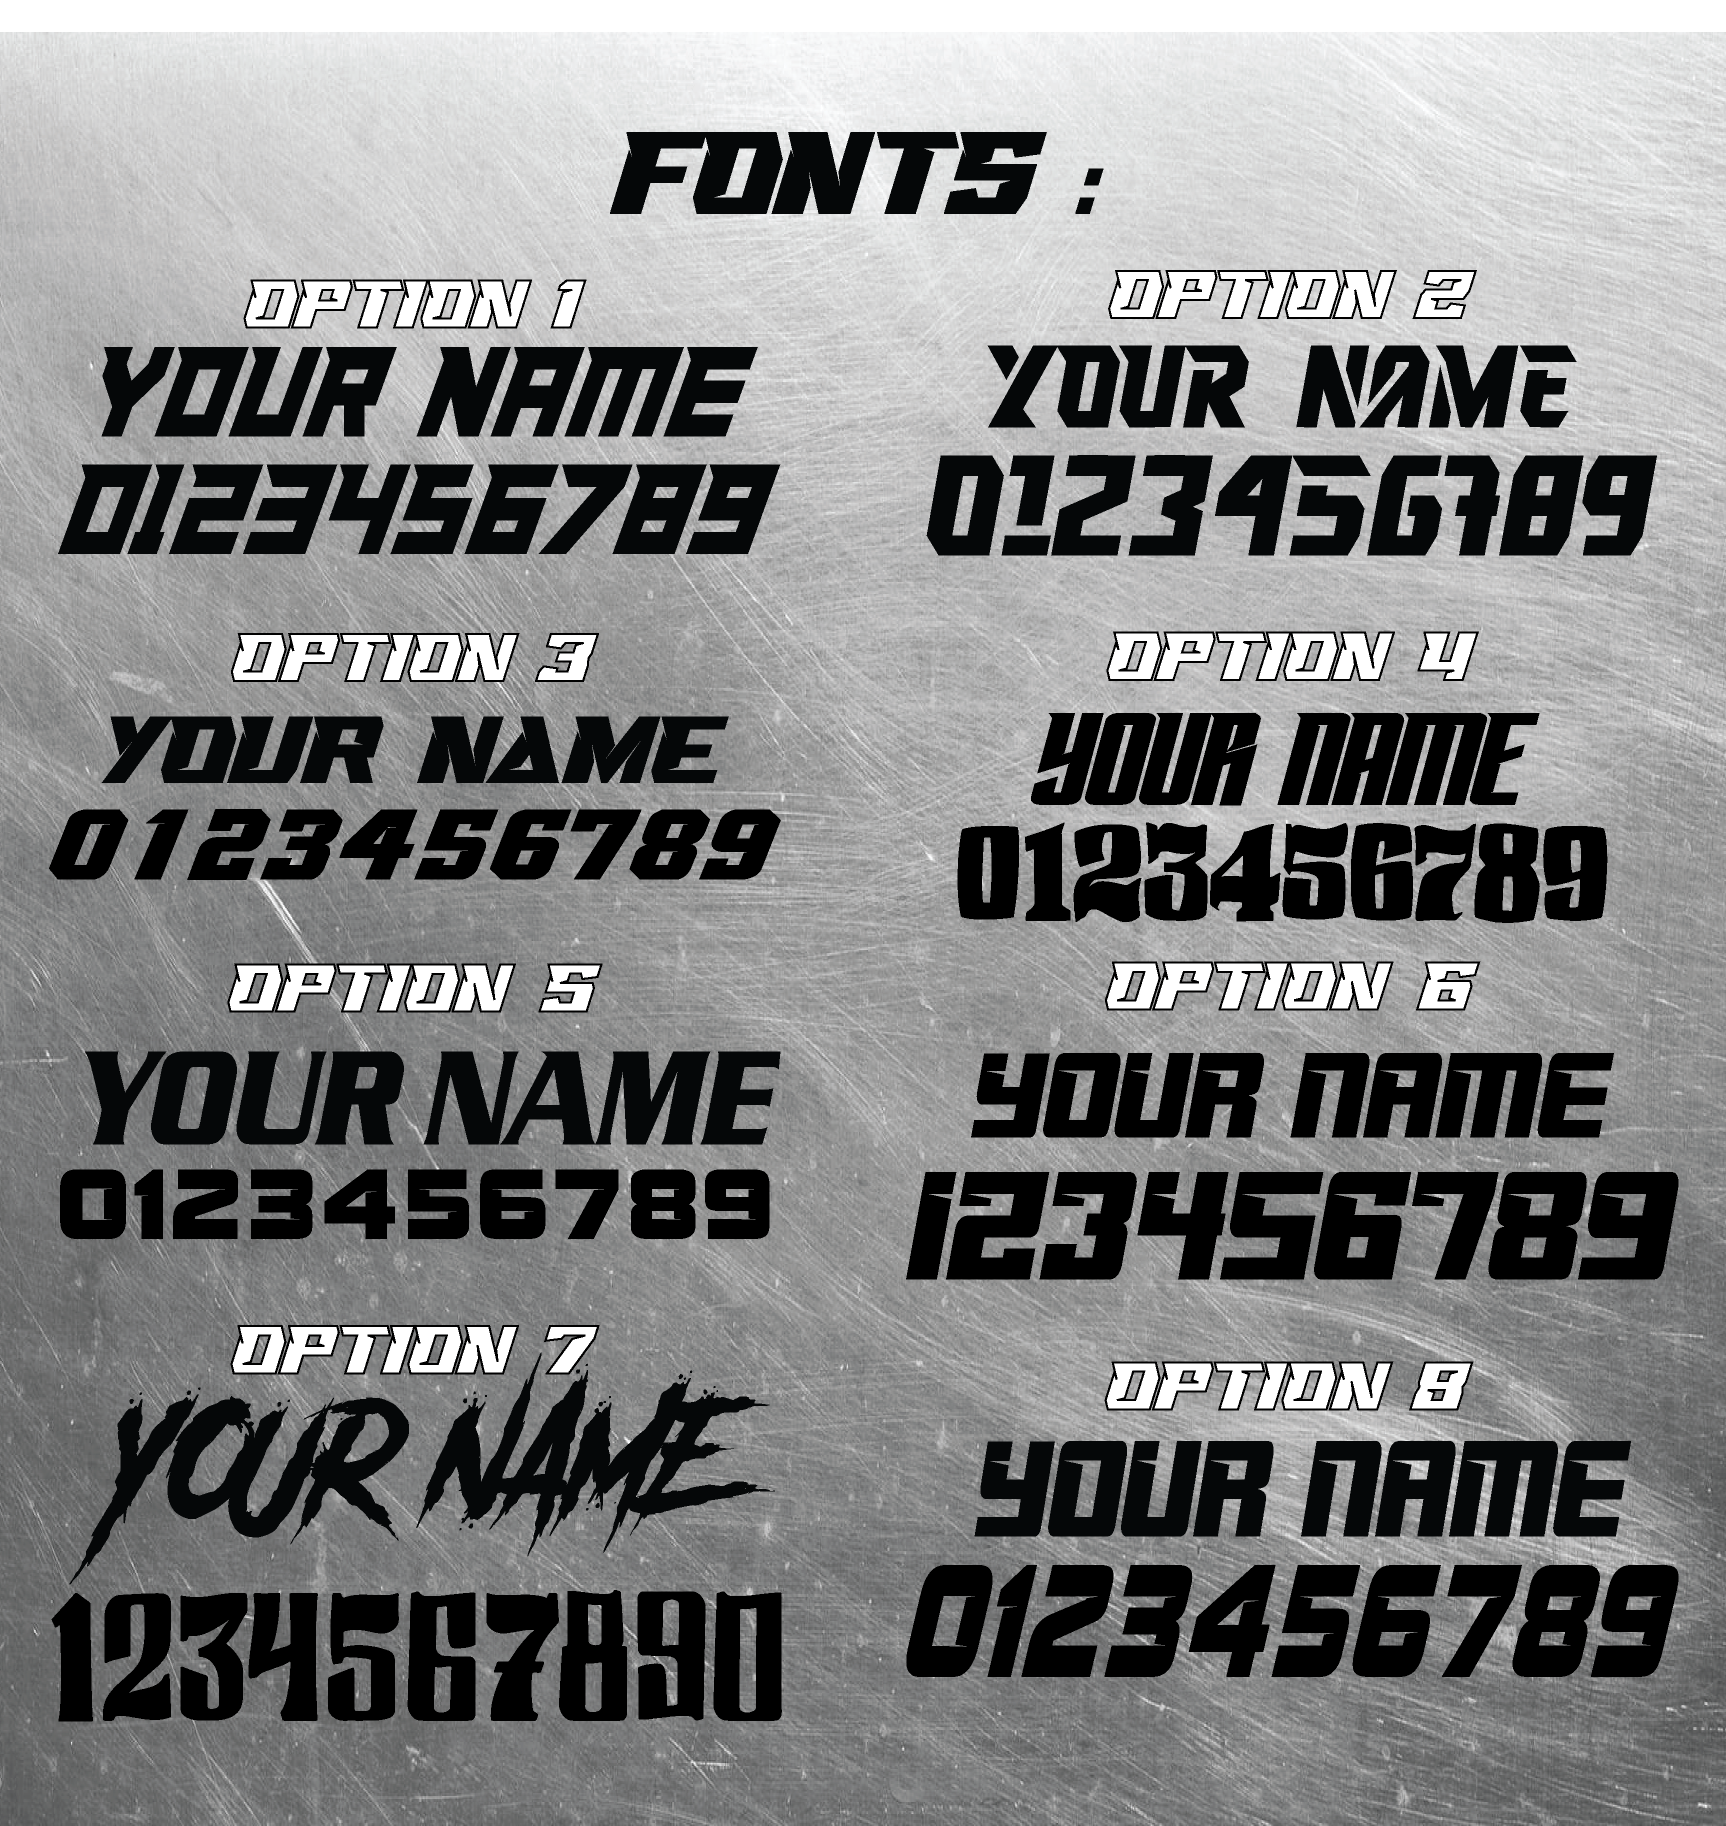 Personalized Number Plate Decals, Custom Name Number Plate decal, Motocross Plate Decals, Waterproof Decals, Number Decals, Any size